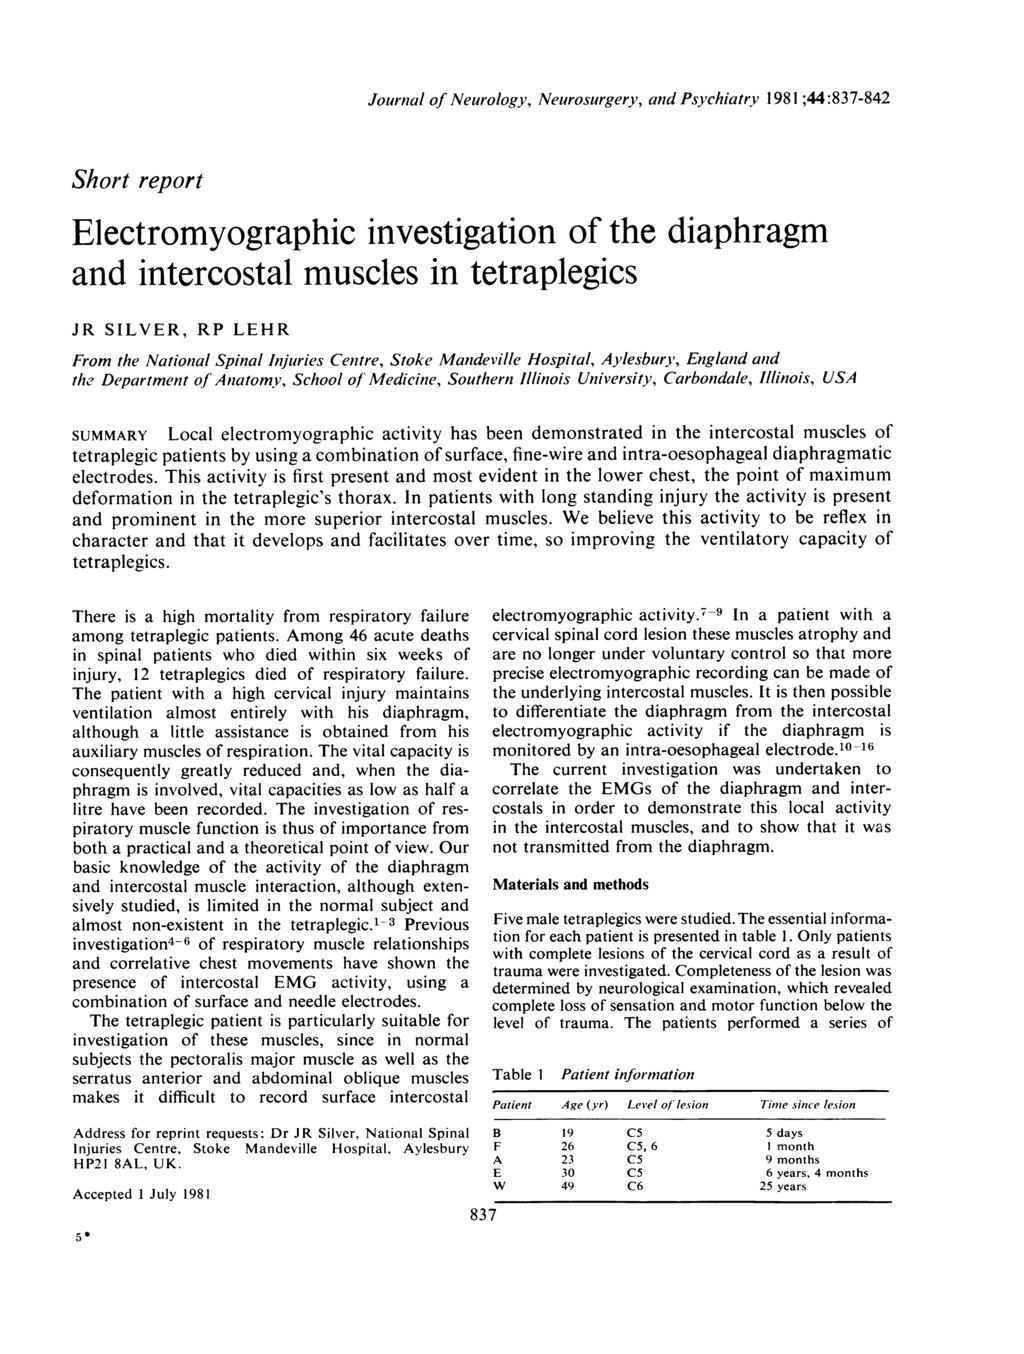 Journal of Neurology, Neurosurgery, and Psychiatry 1981 ;44:837-842 Short report Electromyographic investigation of the diaphragm and intercostal muscles in tetraplegics JR SILVER, RP LEHR From the